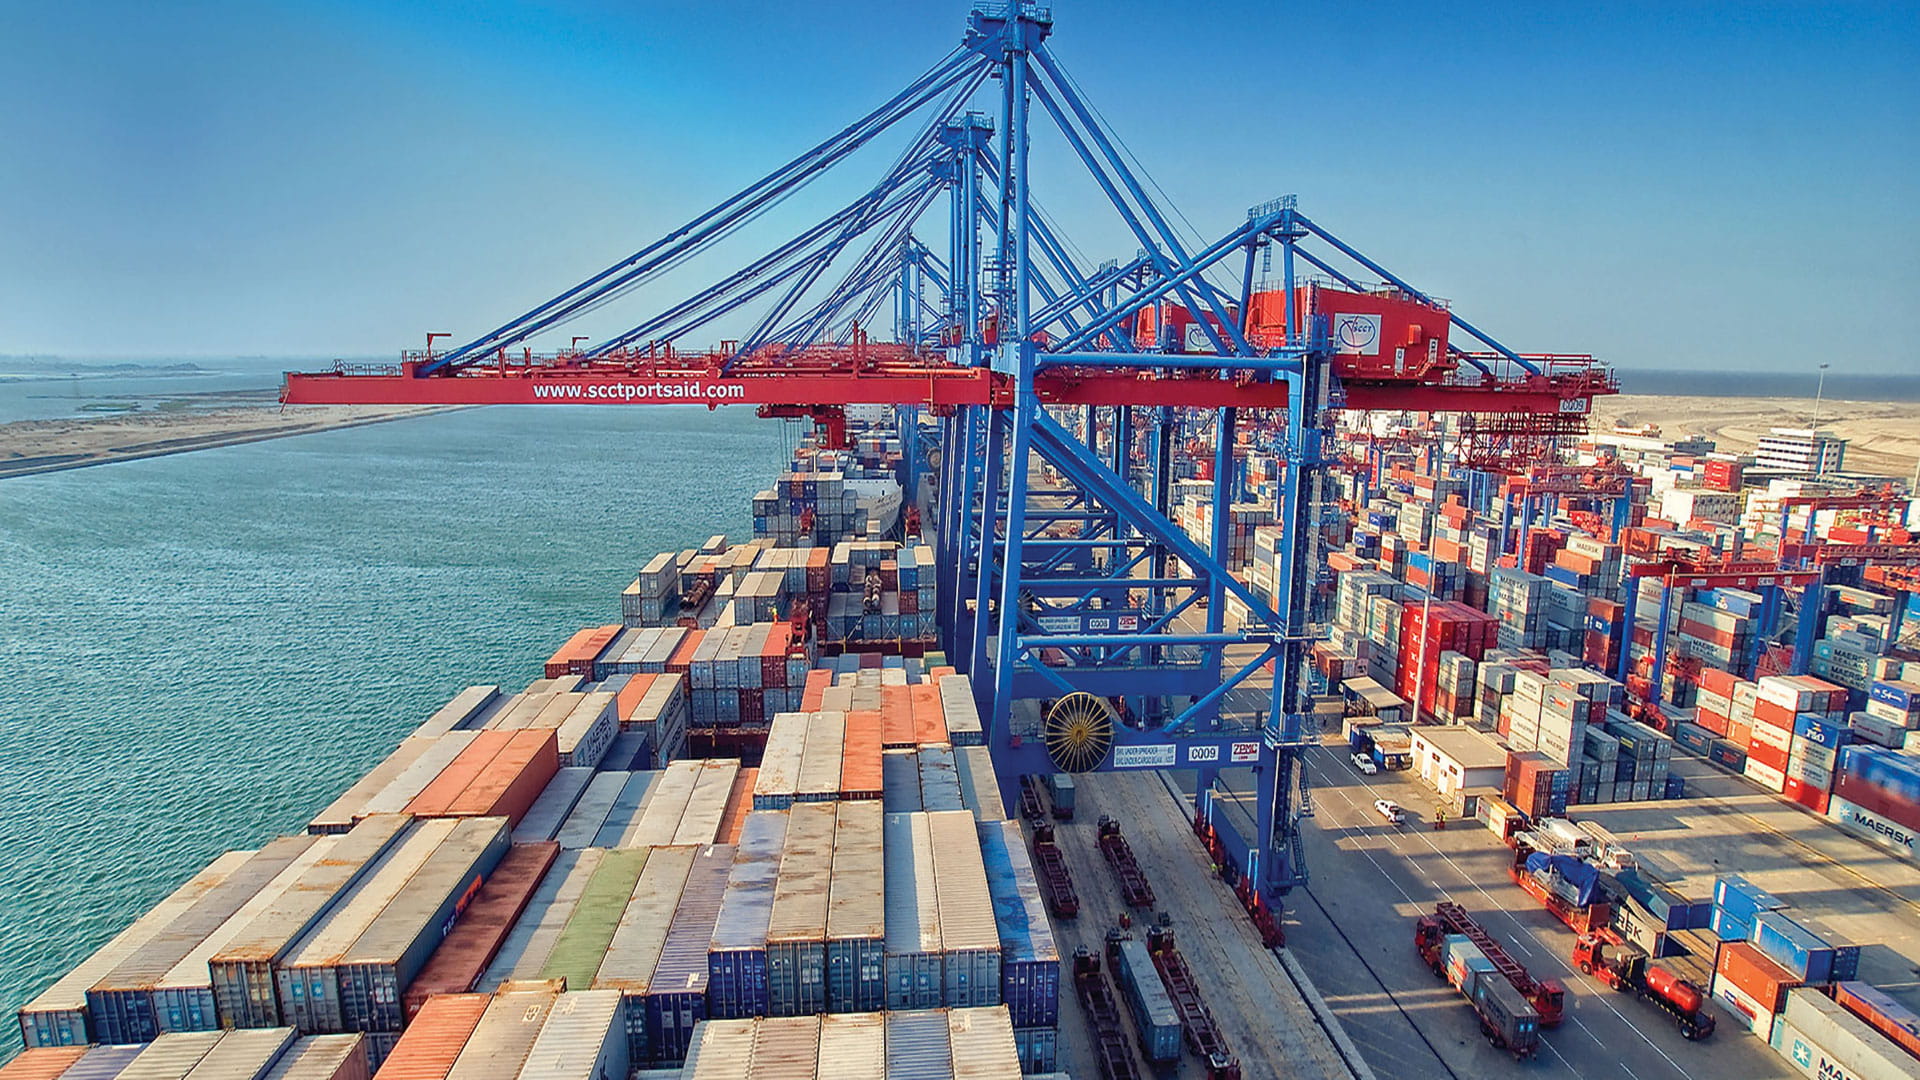 Container terminal design at a port with the help of crane machines